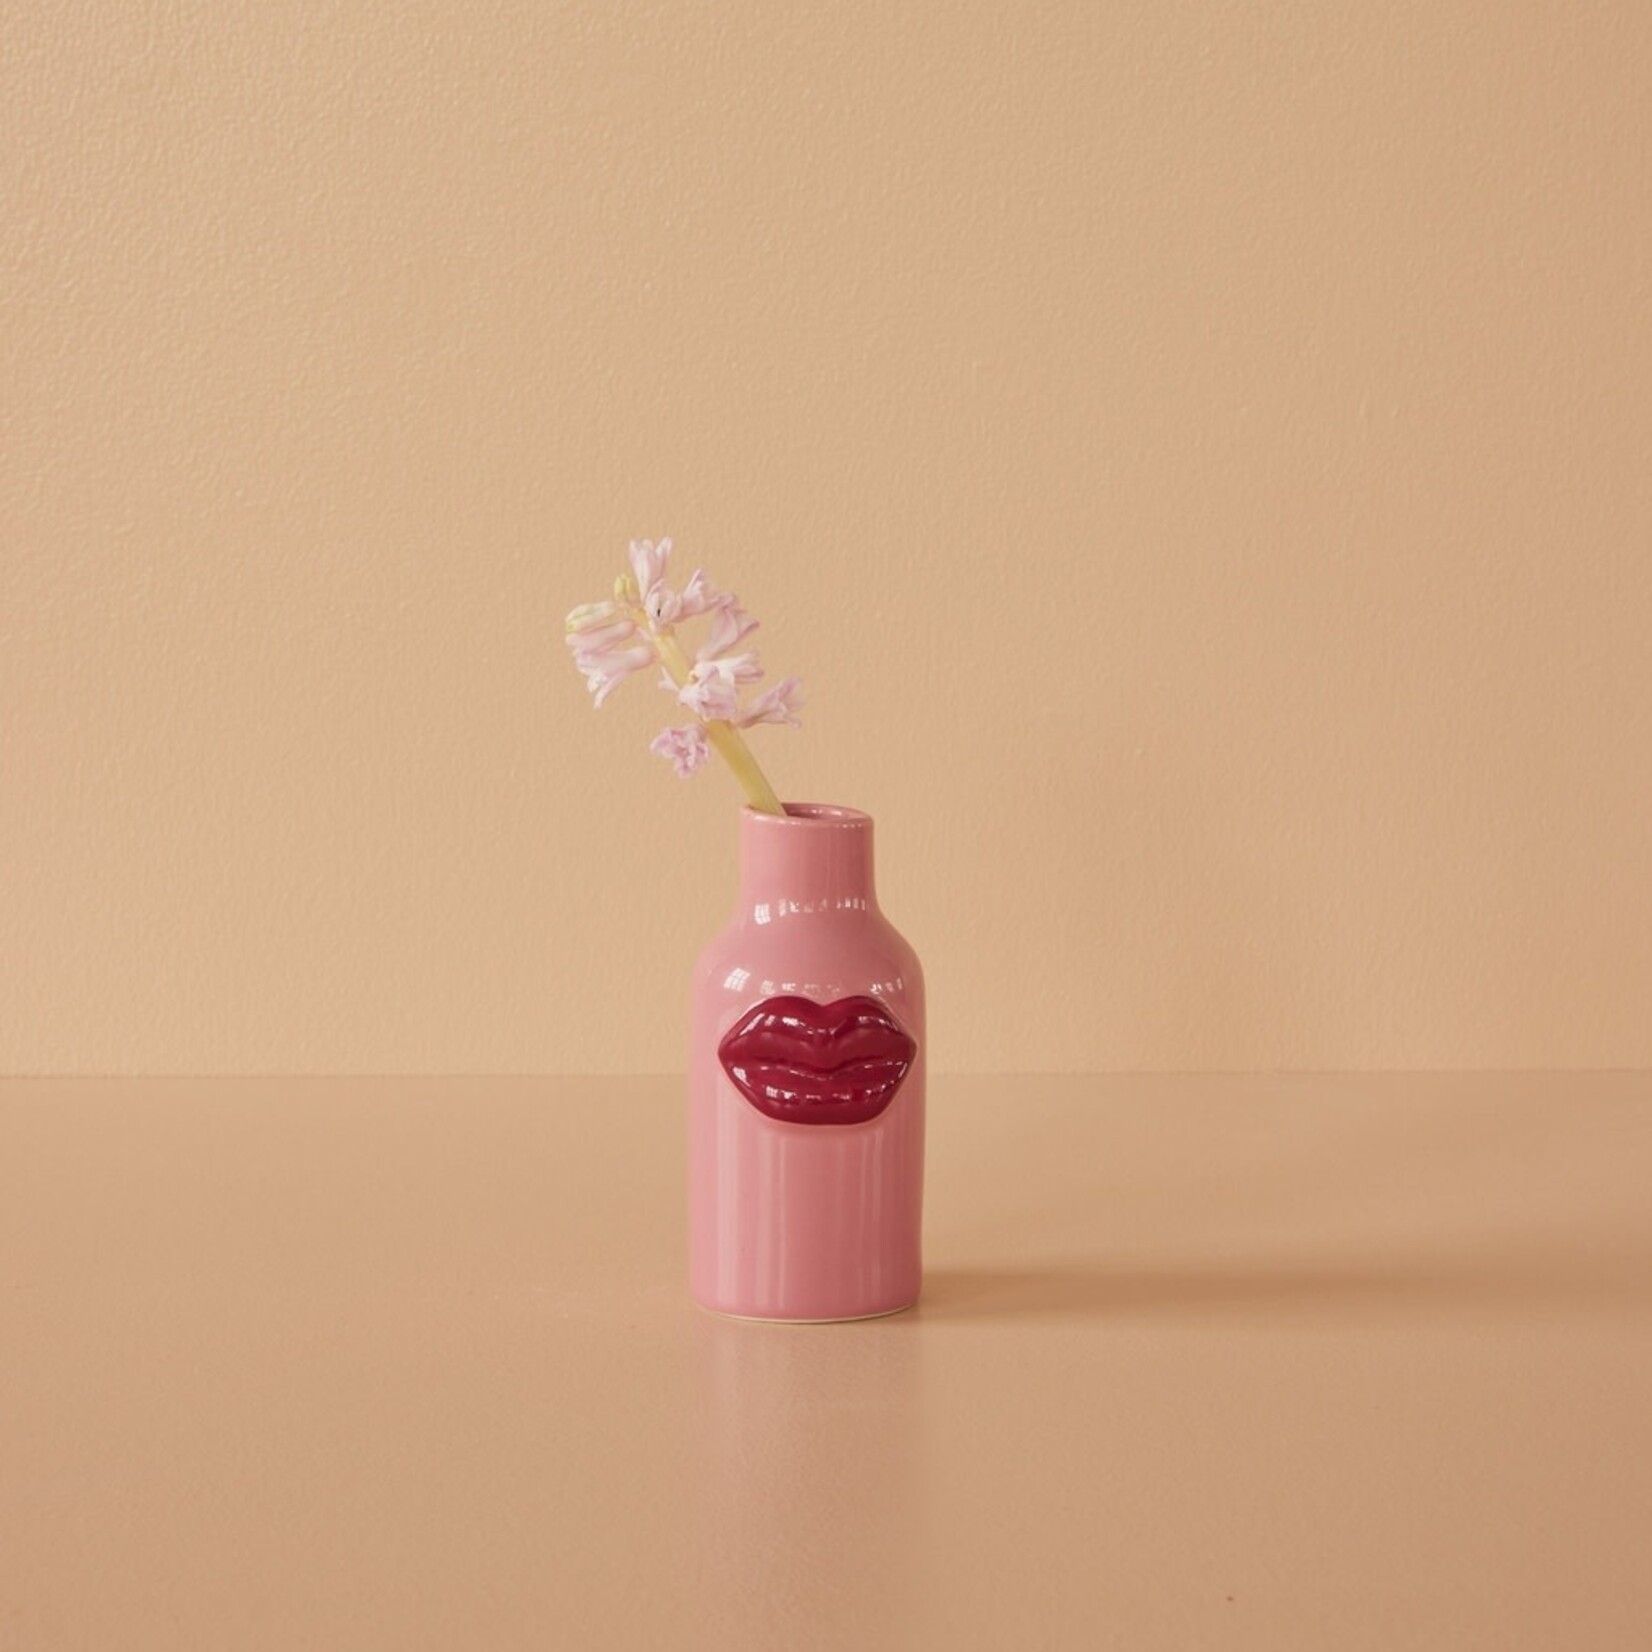 RICE RICE CERAMIC VASE WITH LIPS IN PINK EXTRA SMALL